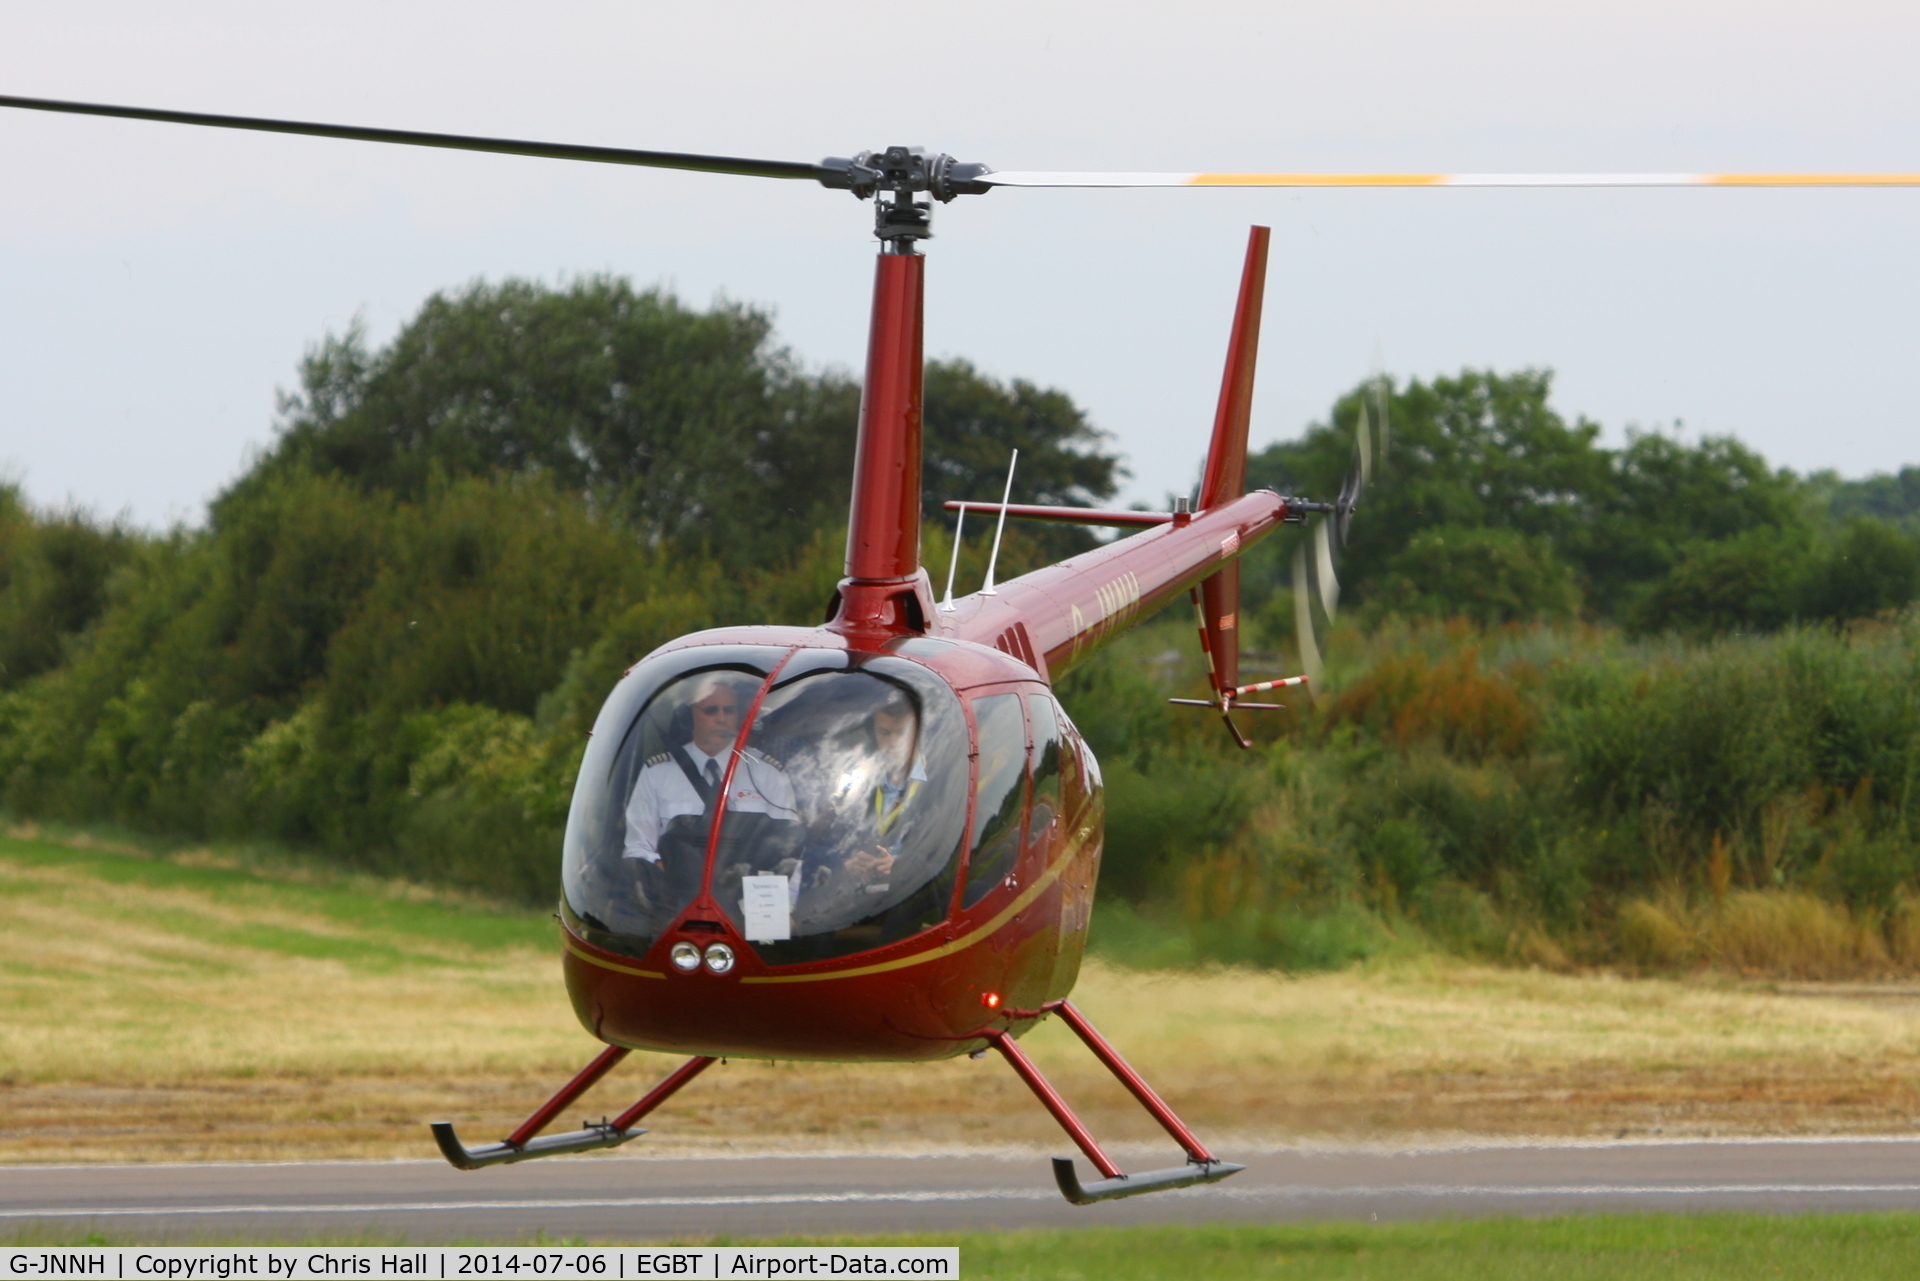 G-JNNH, 2011 Robinson R66 Turbine C/N 0016, ferrying race fans to the British F1 Grand Prix at Silverstone